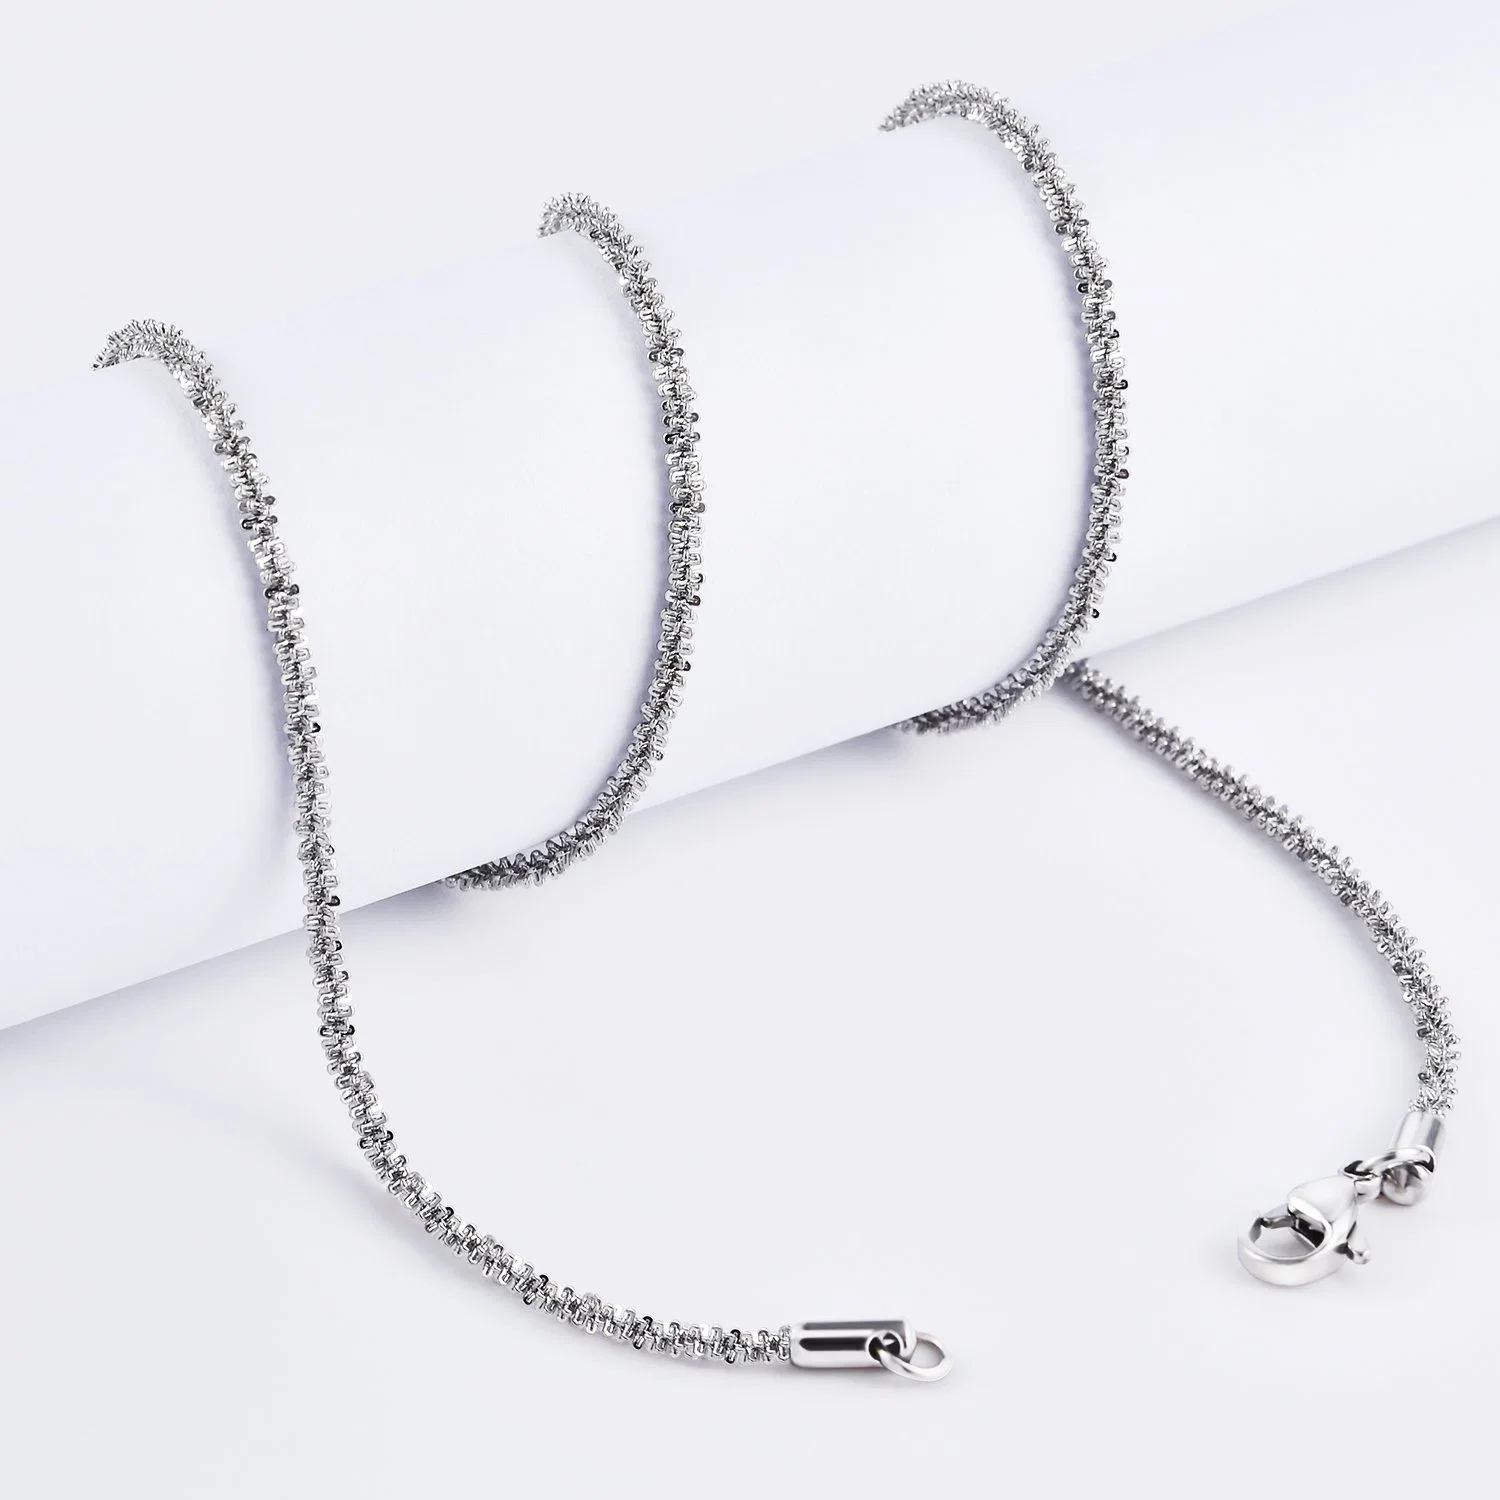 High Quality Fashion Necklace Bracelet Bangle Chain Making Jewelry for Handcraft Gift Design